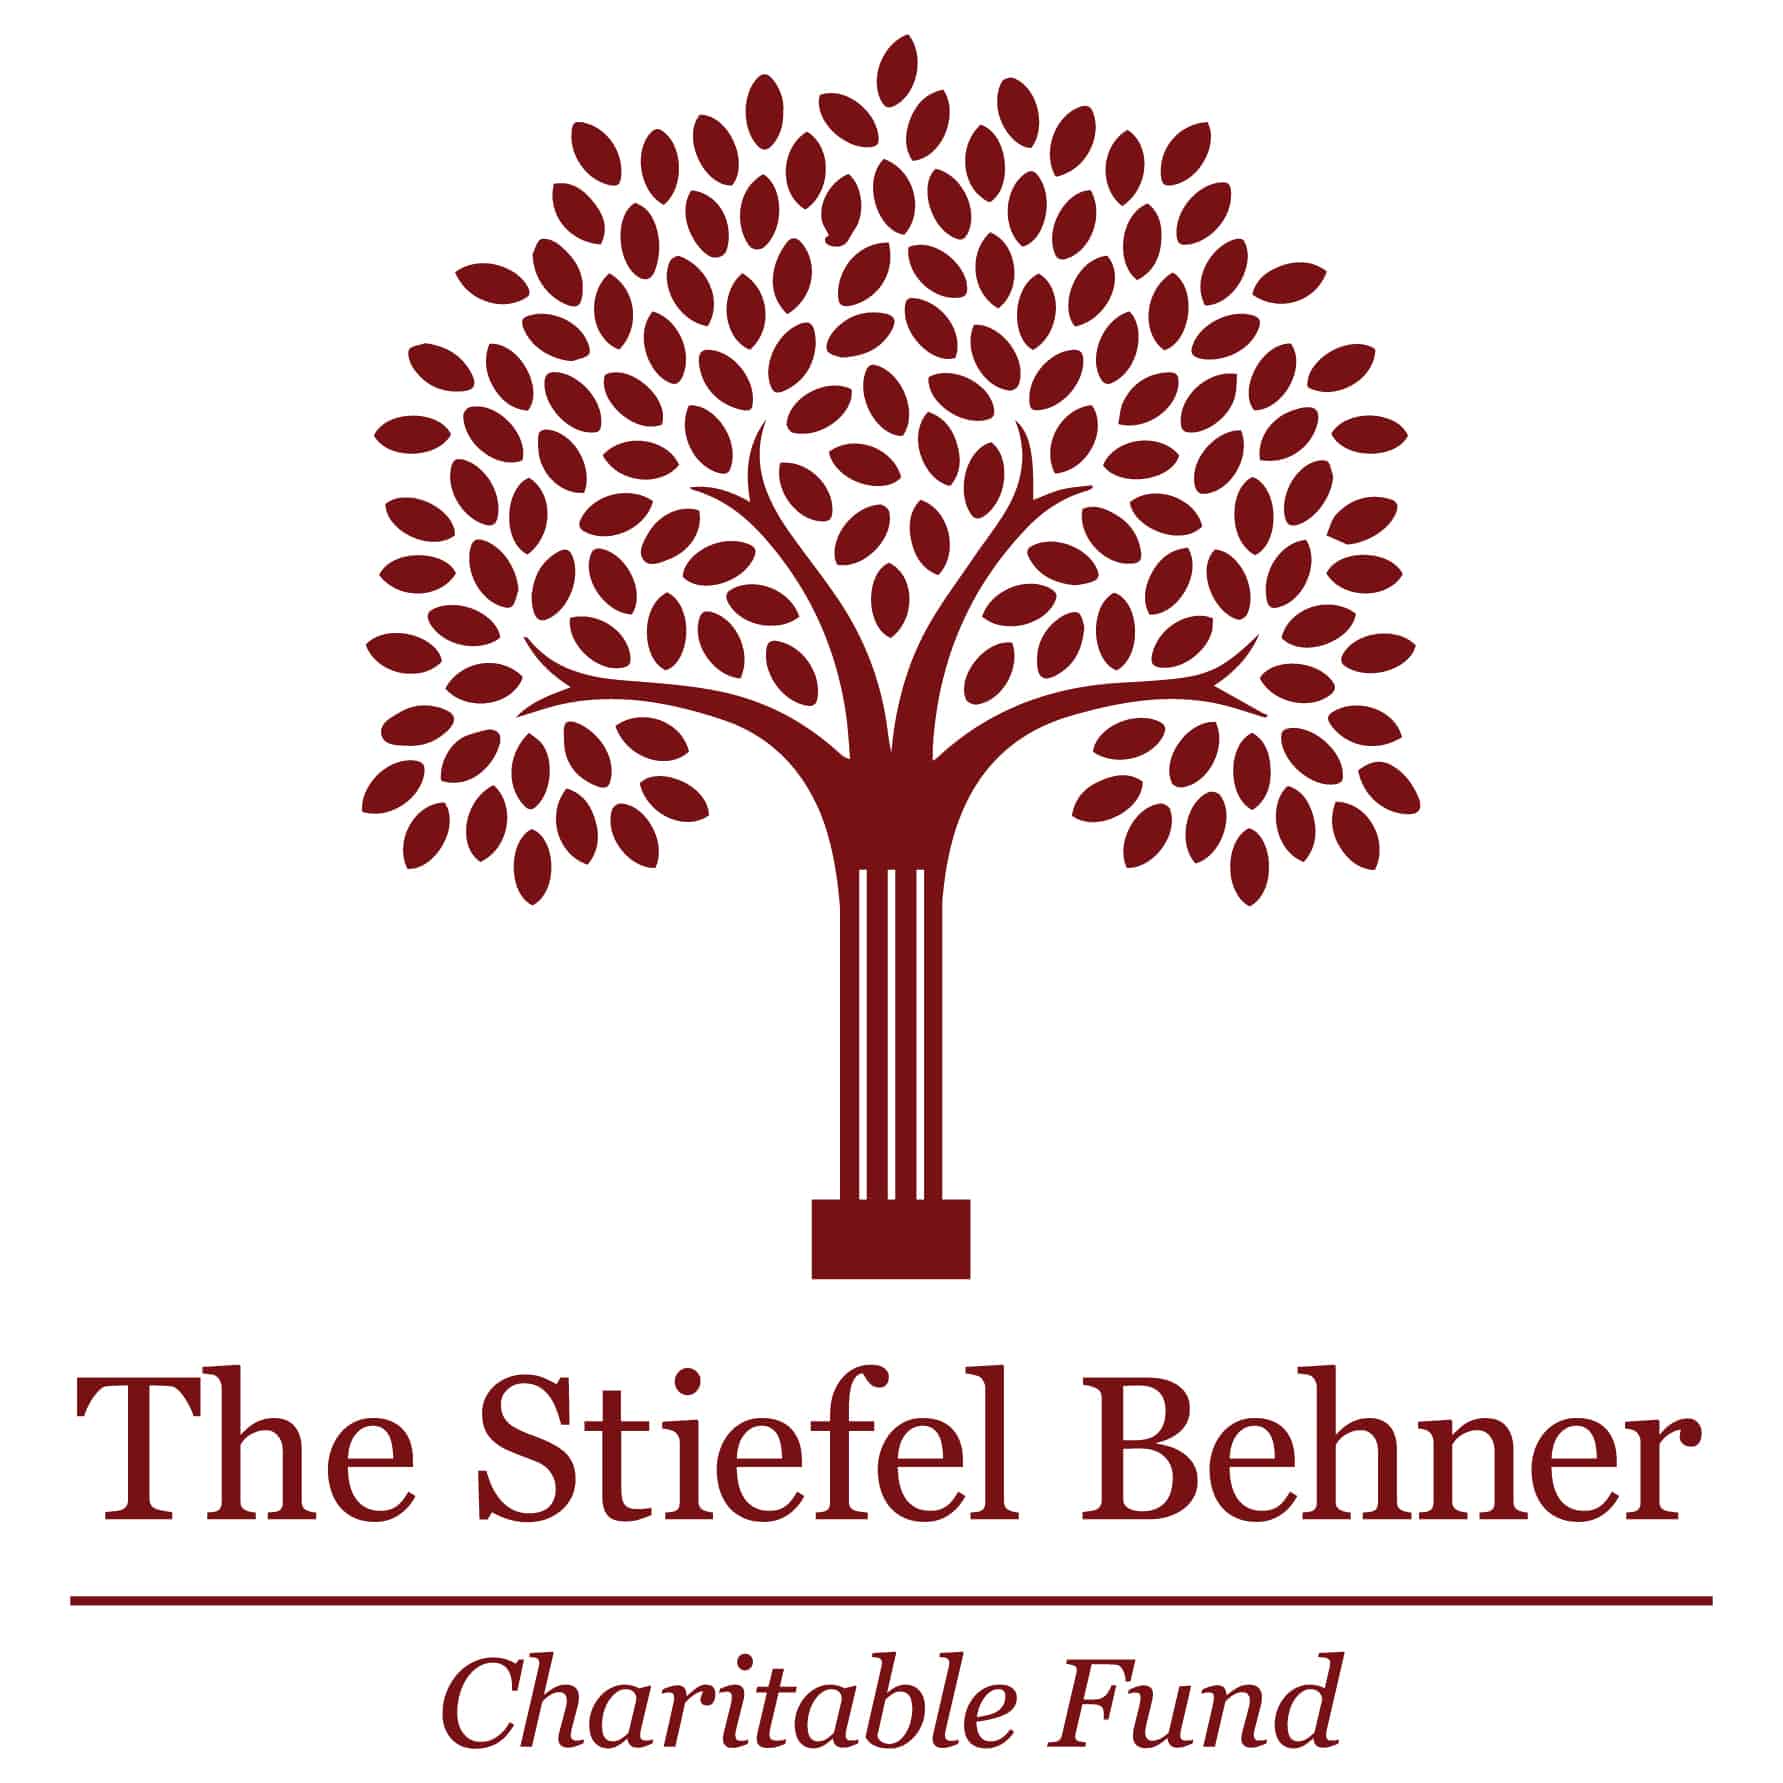 The Stiefel Behner Charitable Fund